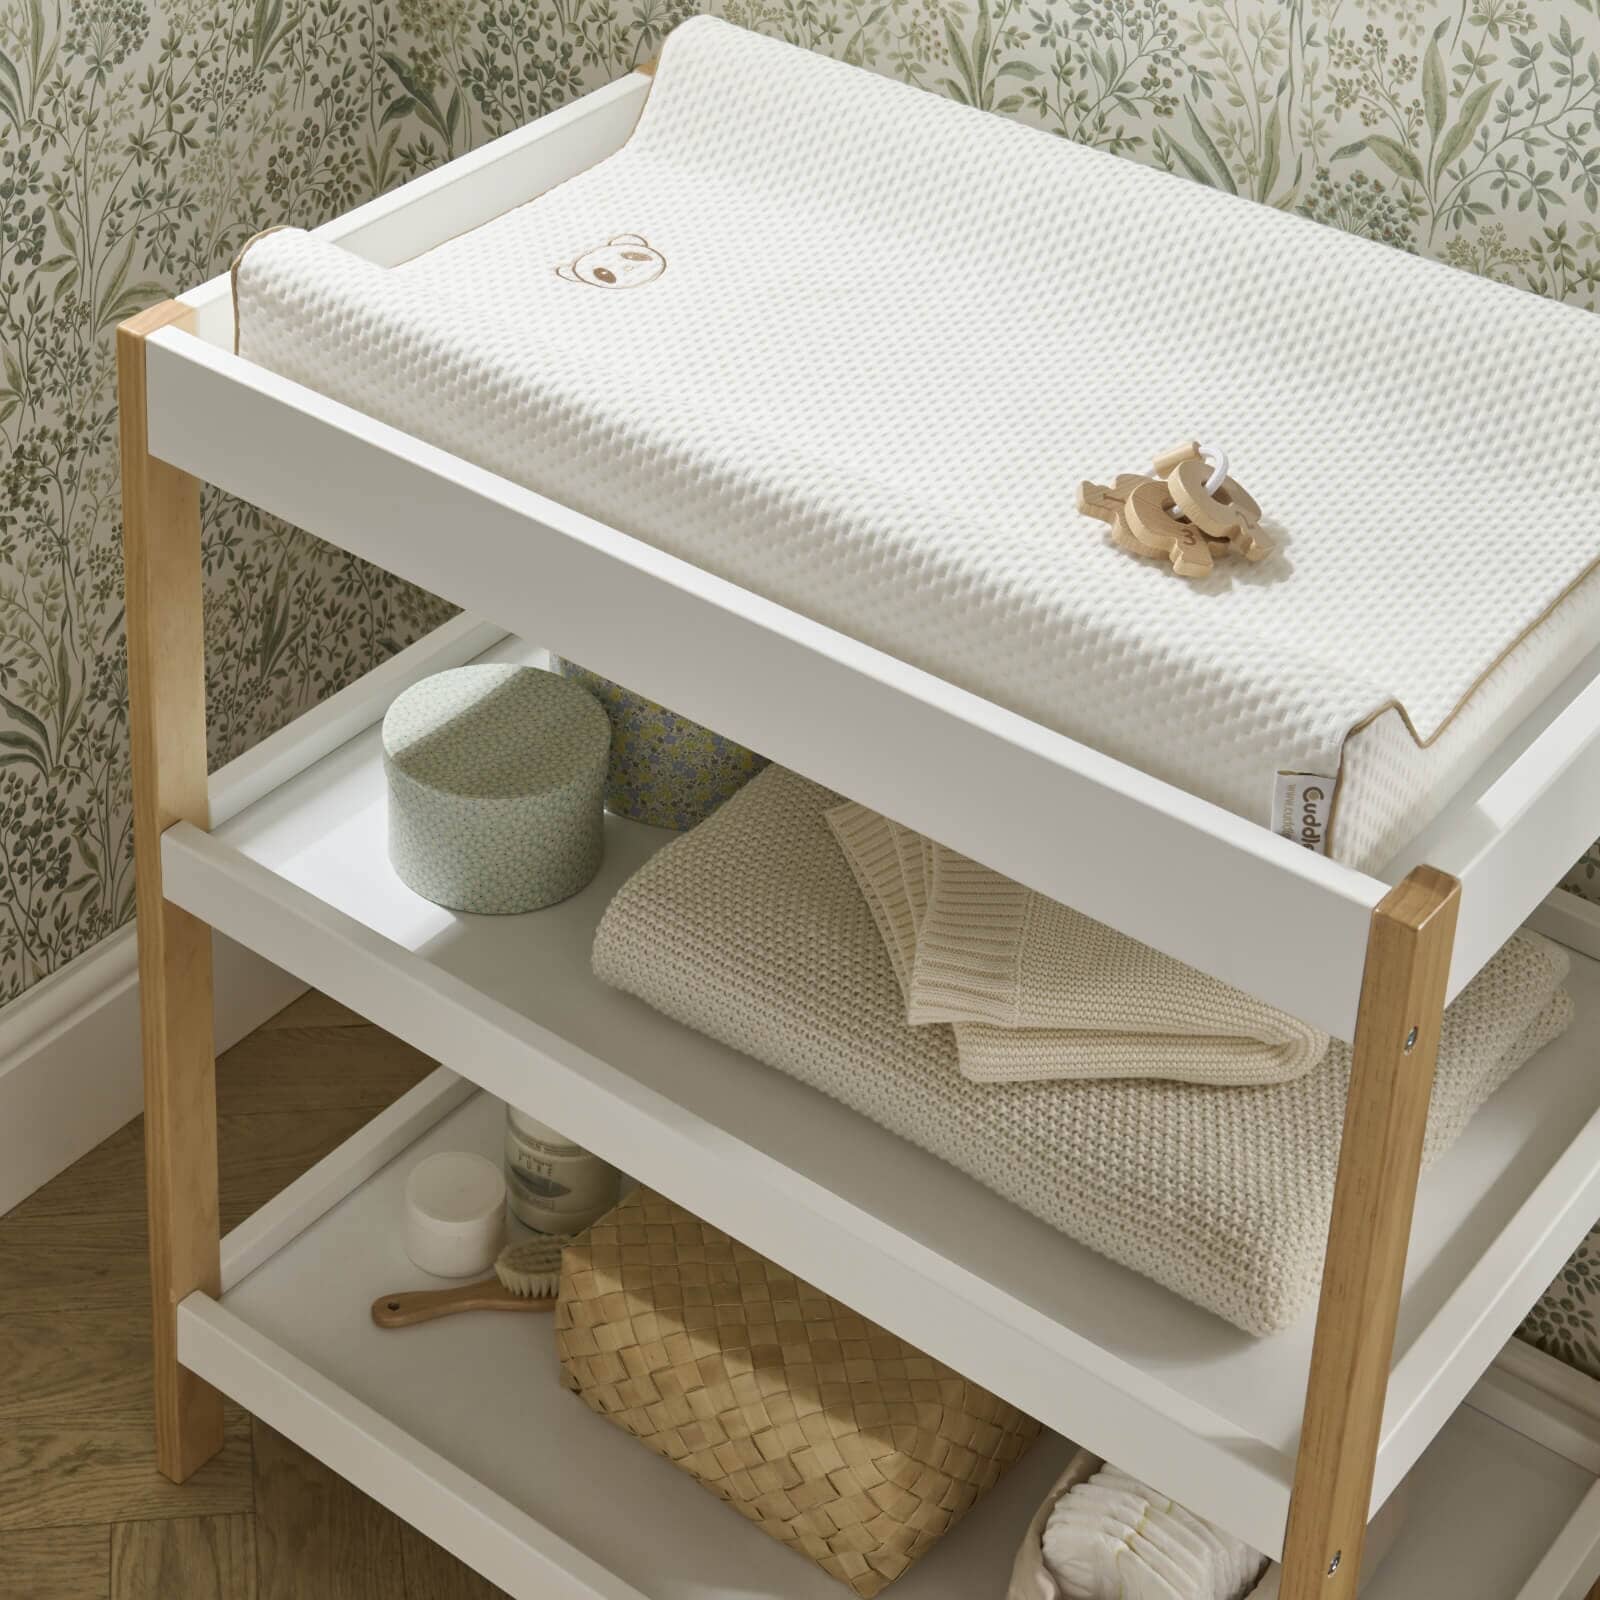 Nola Changing Table - White & Natural Furniture Singles CuddleCo 